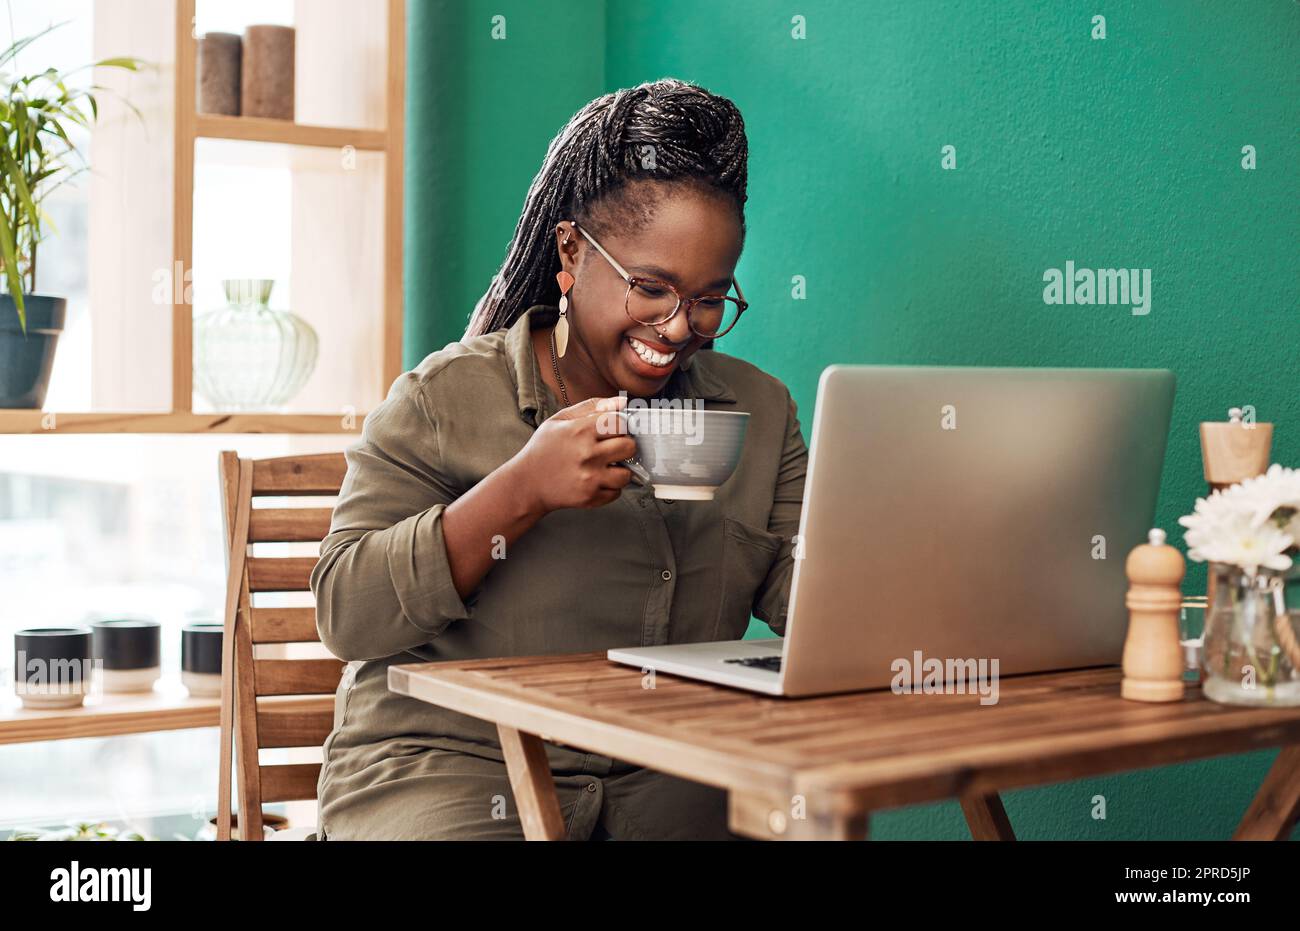 Welcome to the age of the freelancer. a young woman having coffee and using a laptop at a cafe. Stock Photo